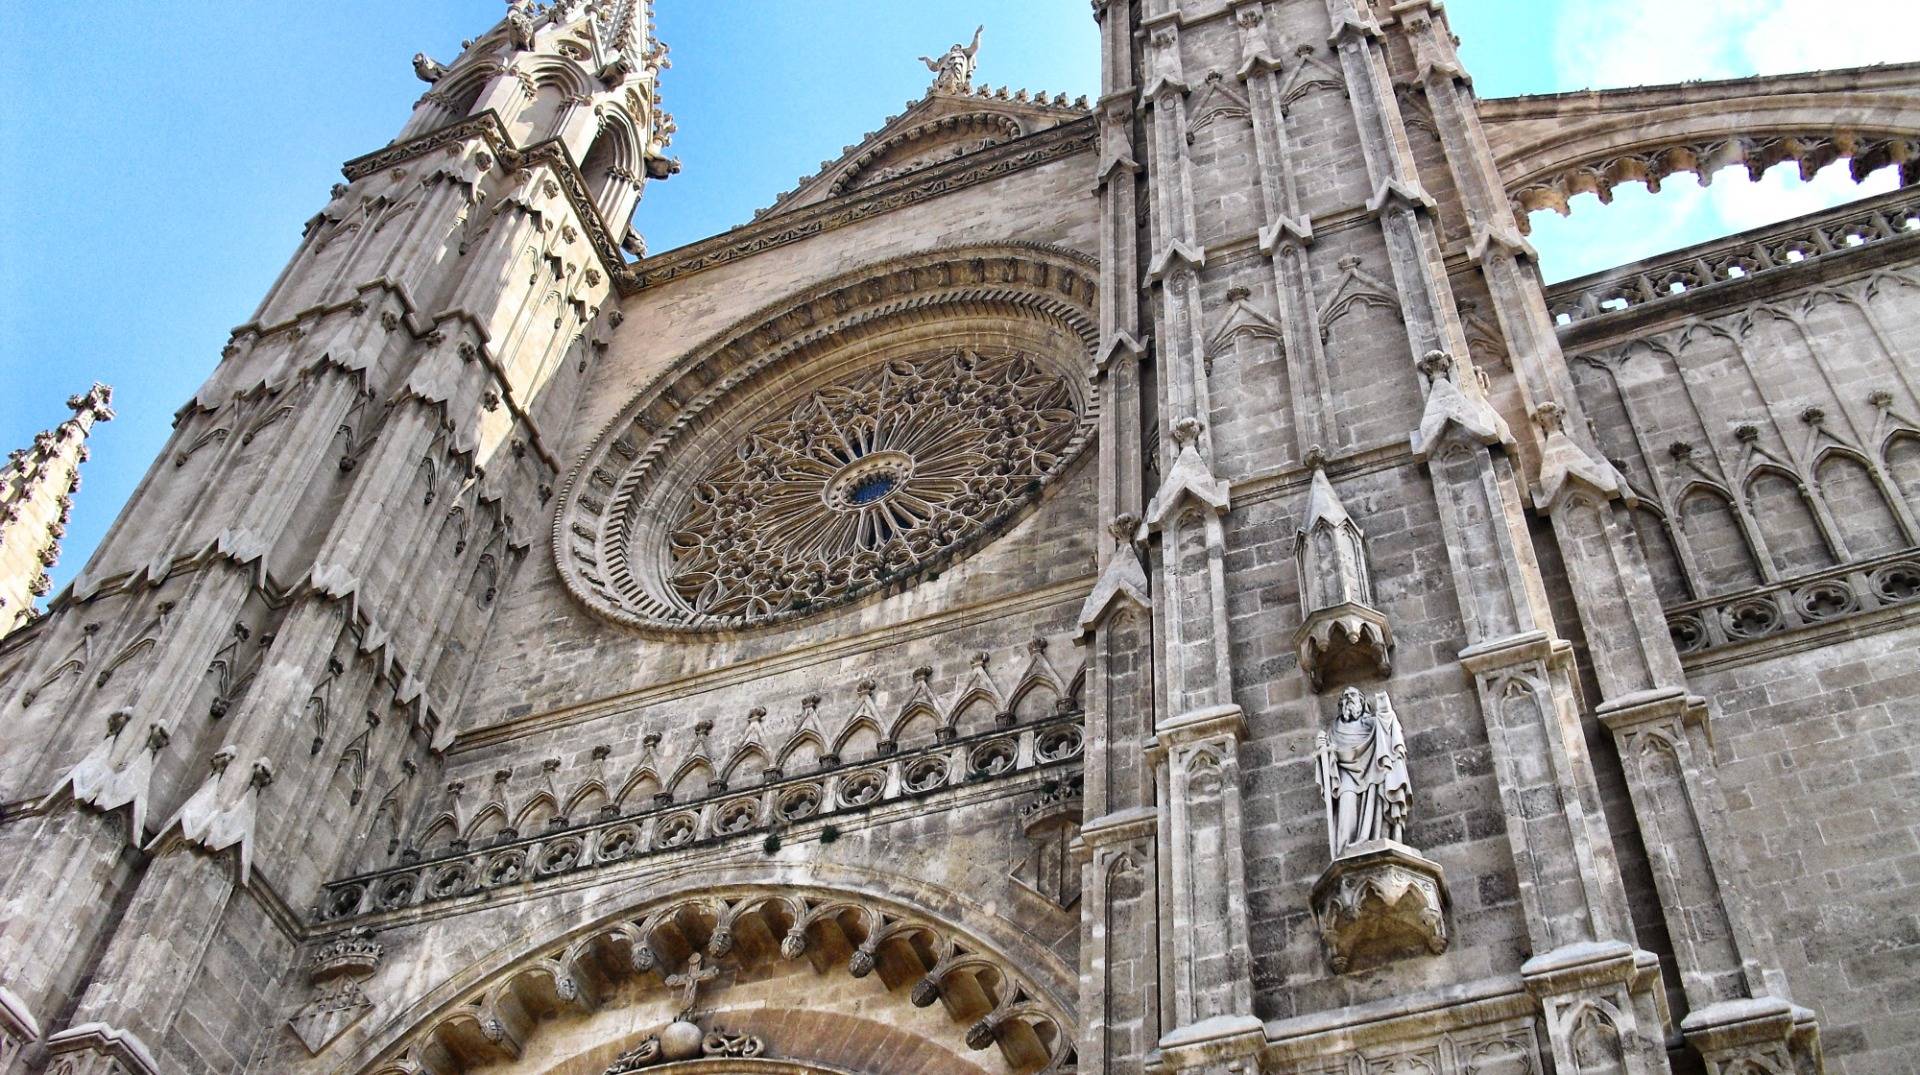 The facade of the cathedral